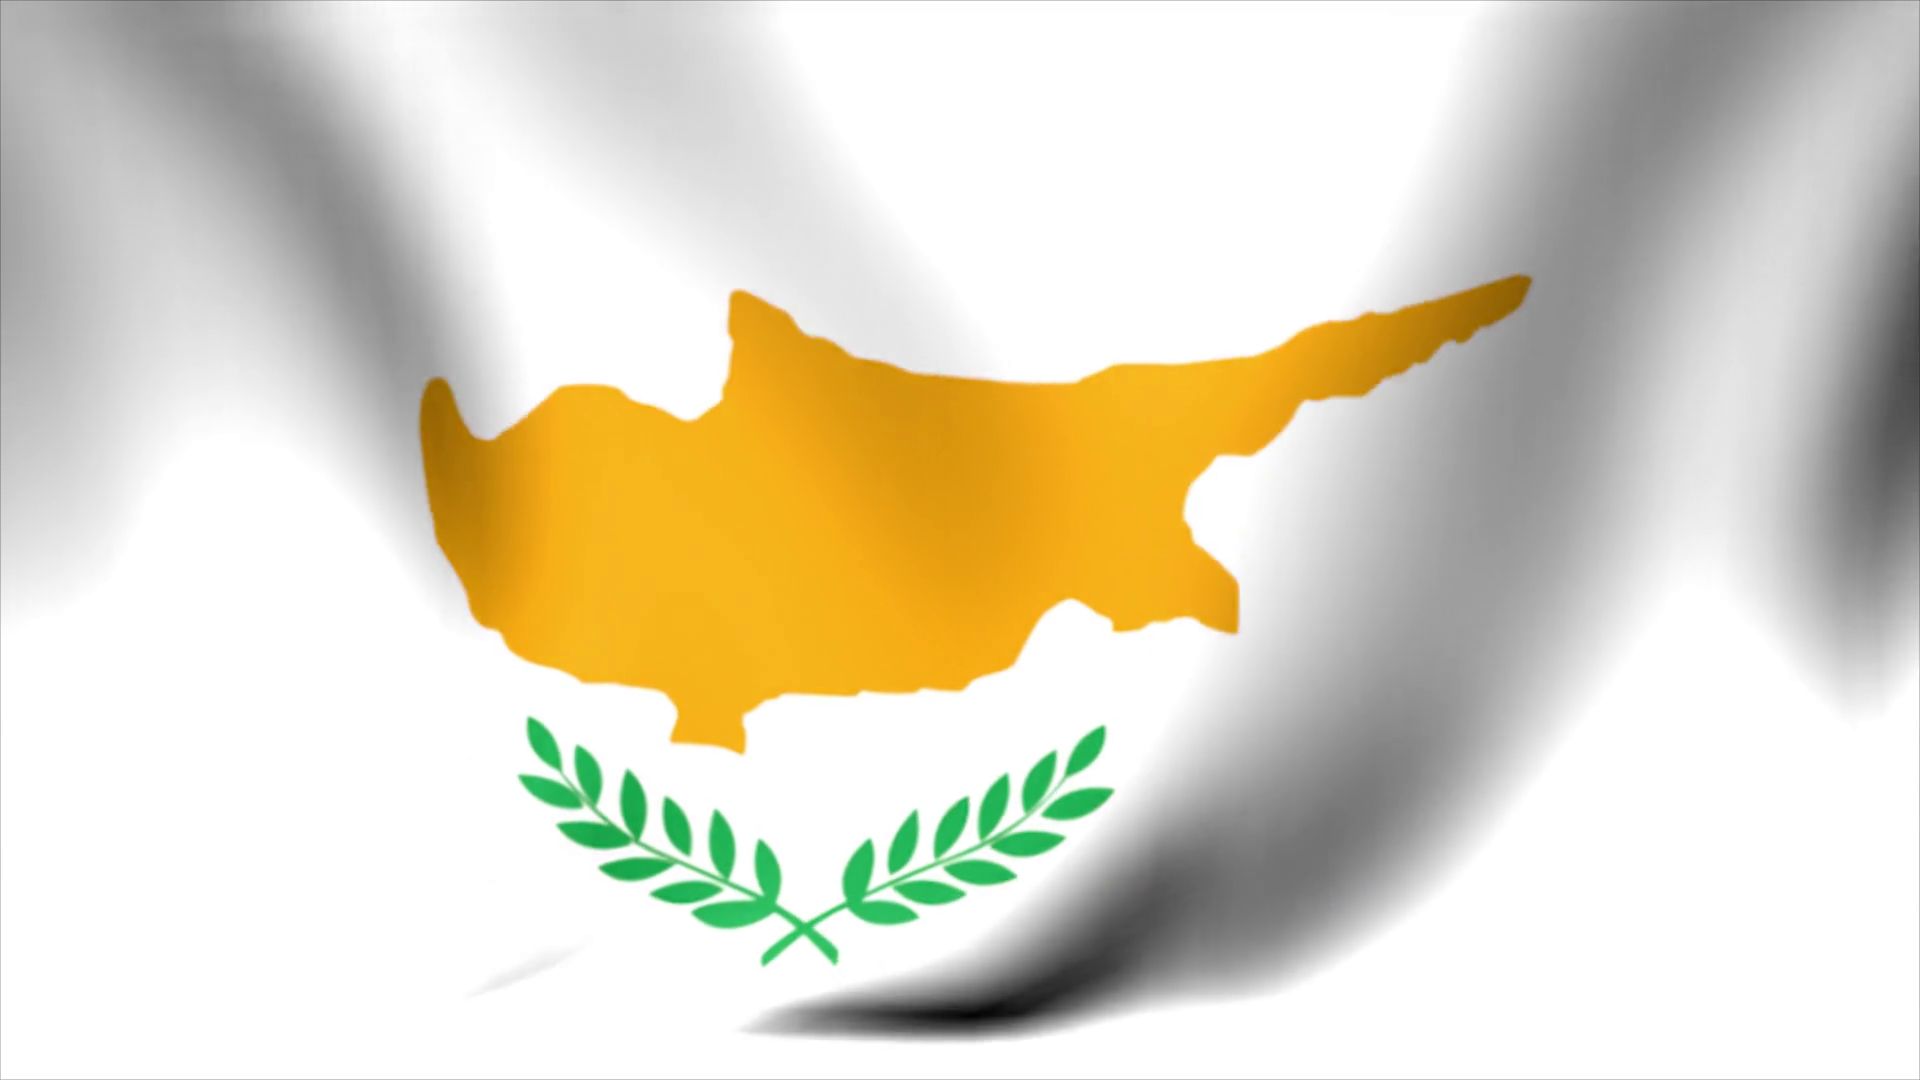 Linux Flag Of Cyprus Wallpaper